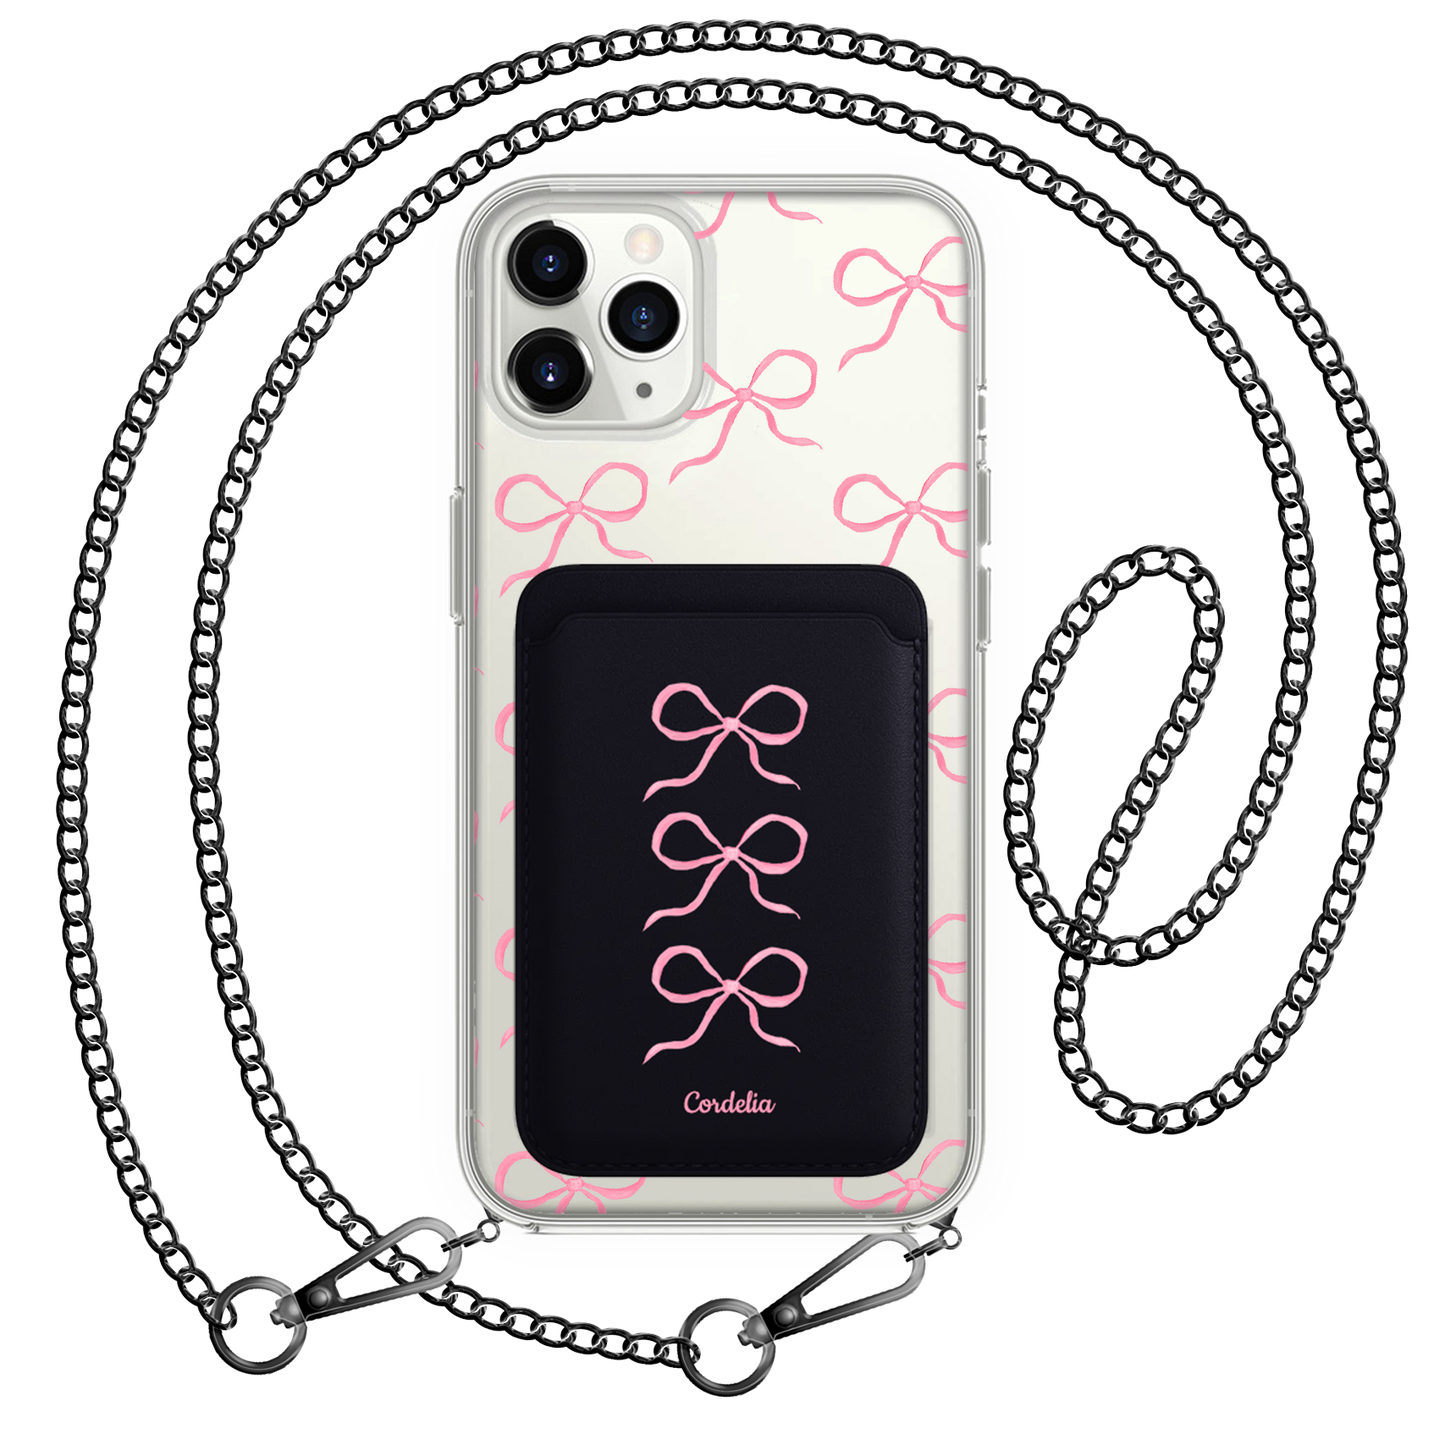 iPhone Magnetic Wallet Case - Coquette Pink Bow 2.0